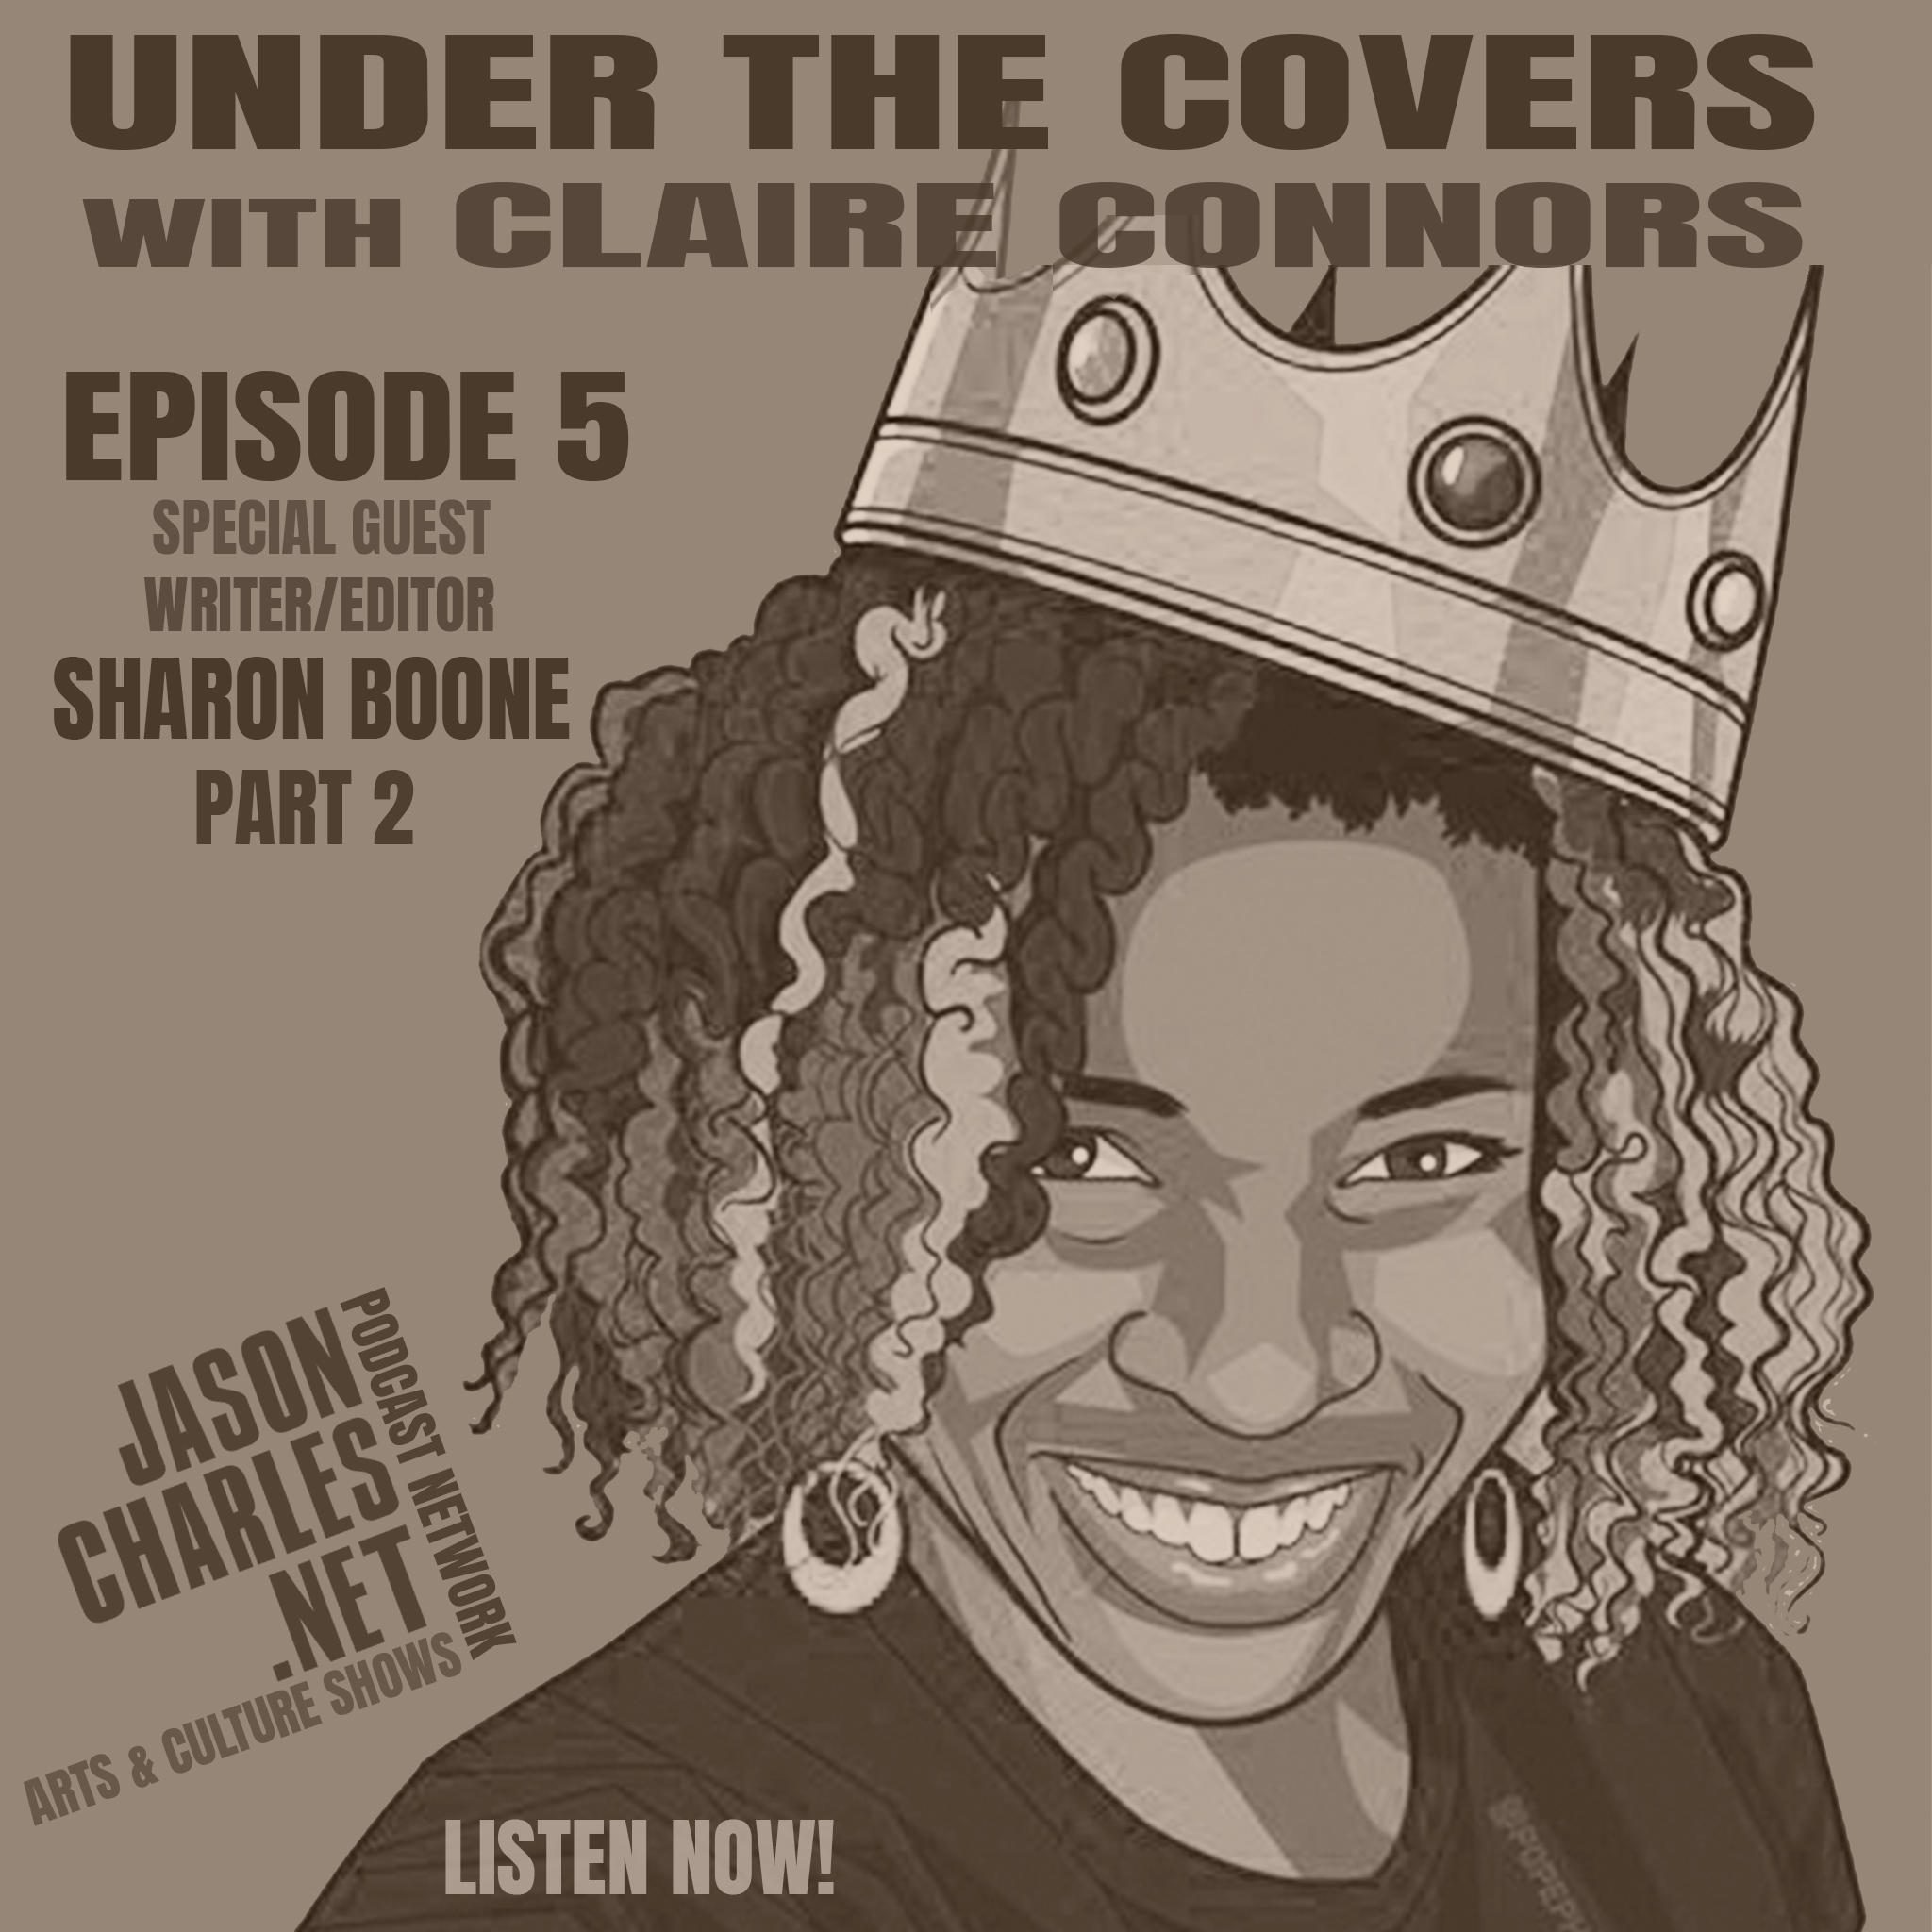 UNDER THE COVERS with Claire Connors Episode 5 Guest Sharon Boone Part 2